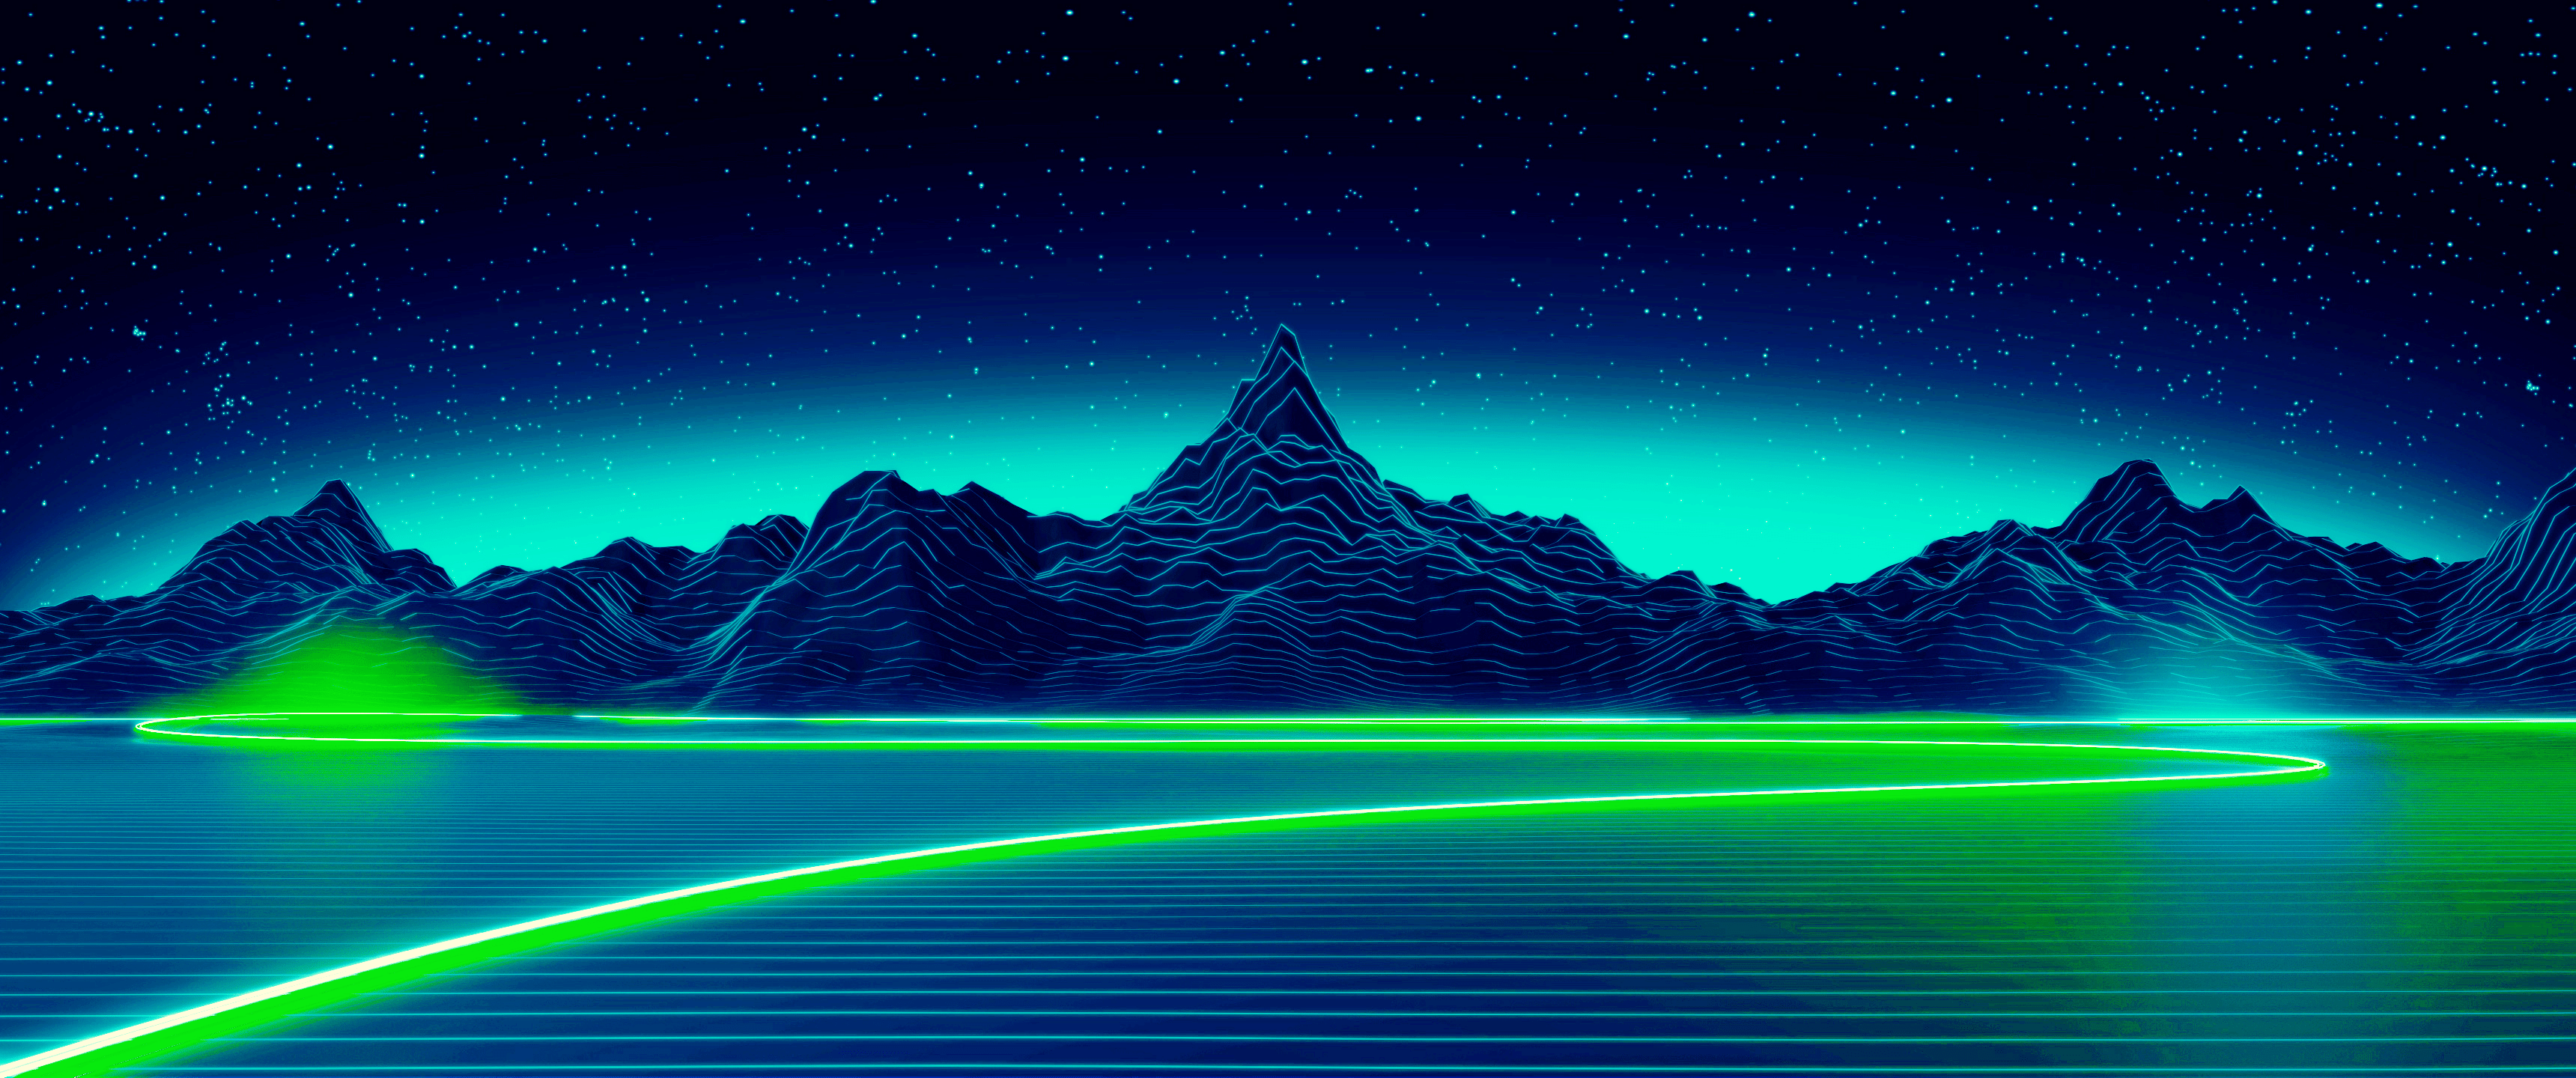 A neon green and blue synthwave wallpaper with a road going through a field - 3440x1440